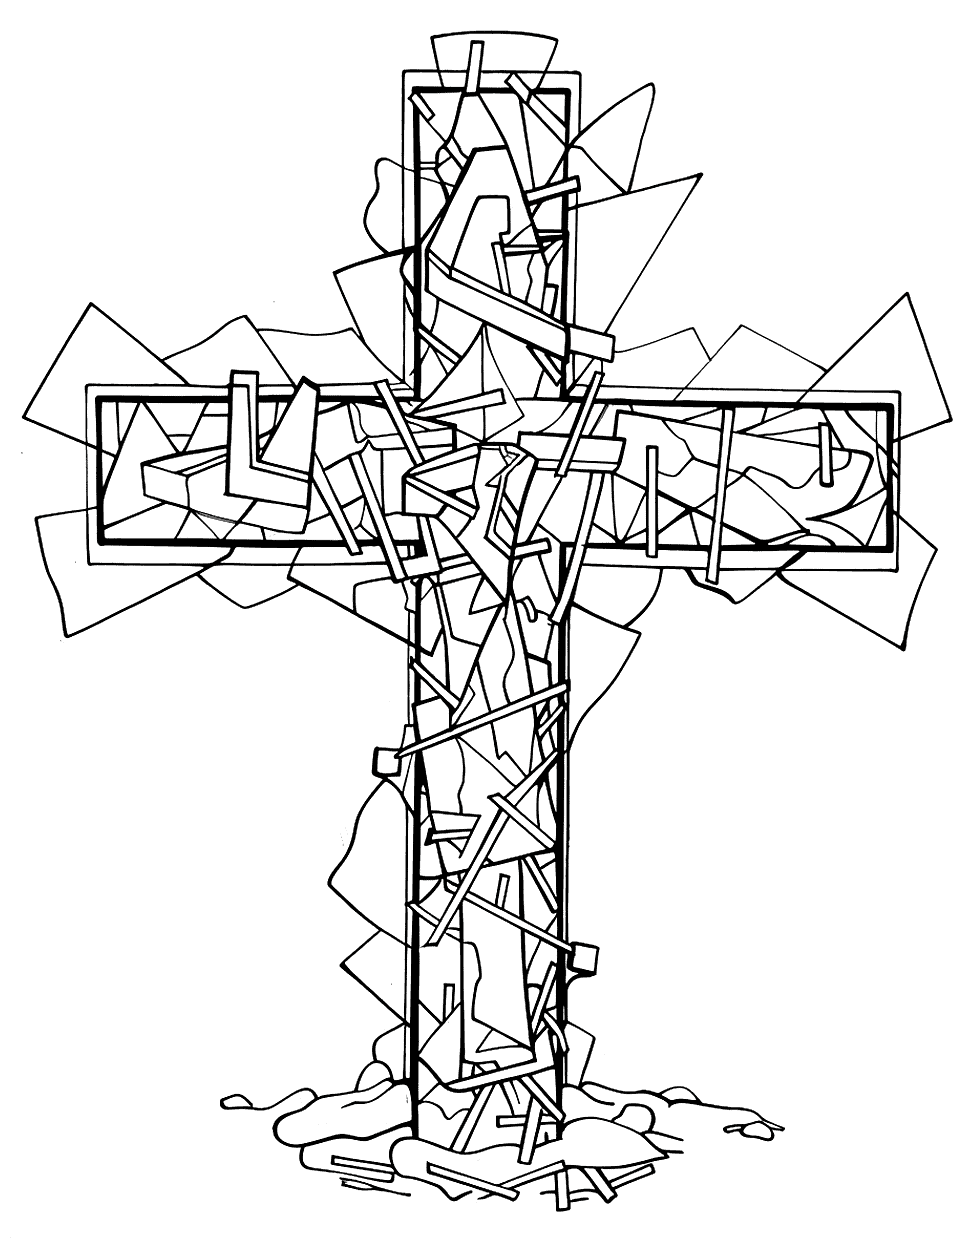 Shiny Glass Cross Coloring Page - A cross with a shiny, glass-like surface reflecting light.